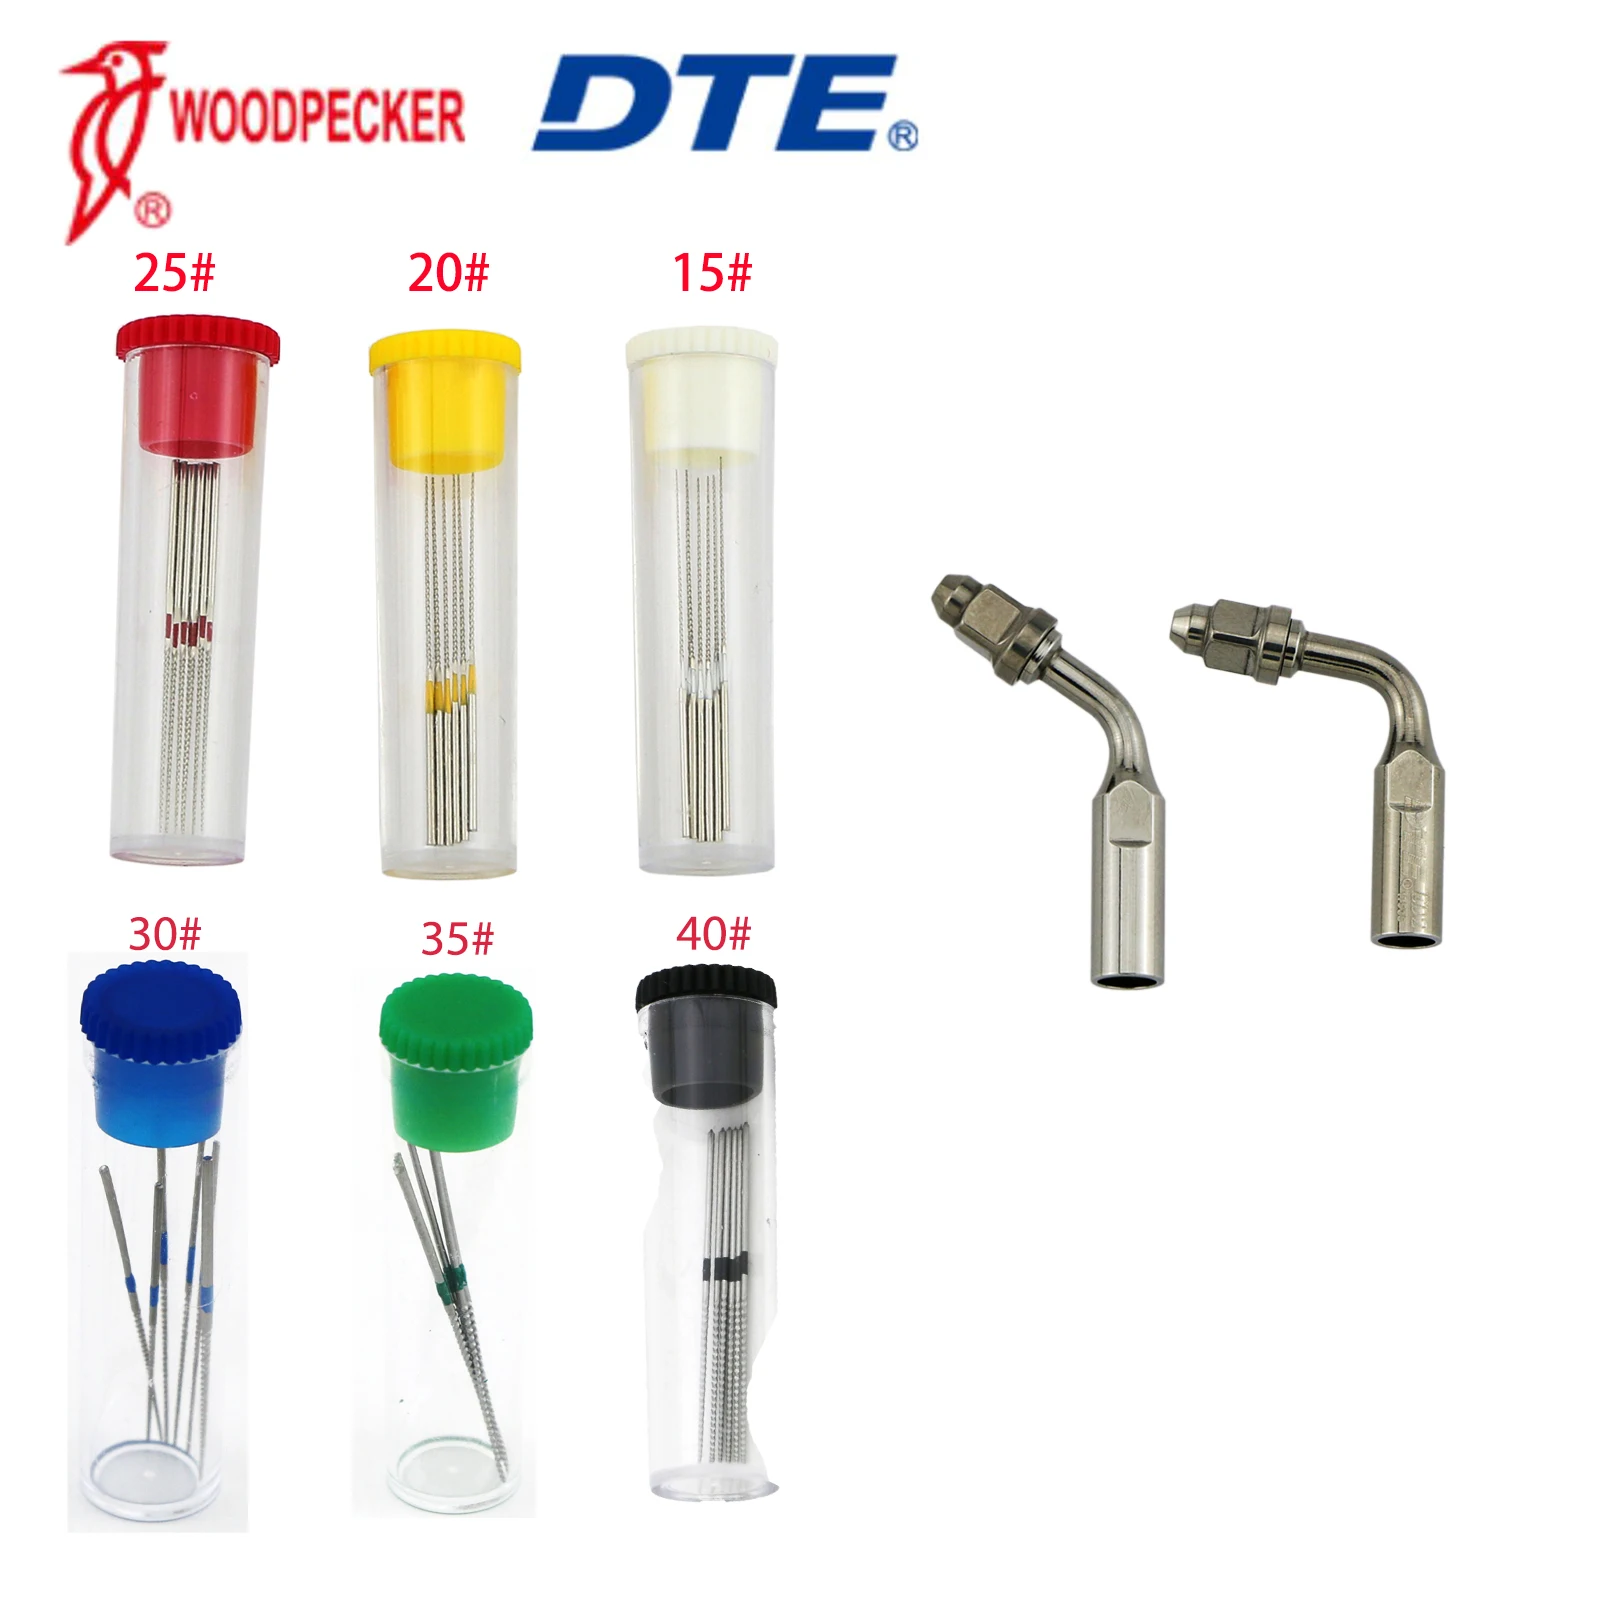 Woodpecker DTE Dental Files Tip for Endo Root Canal Treatment Dentistry Whitening Equipment Kit